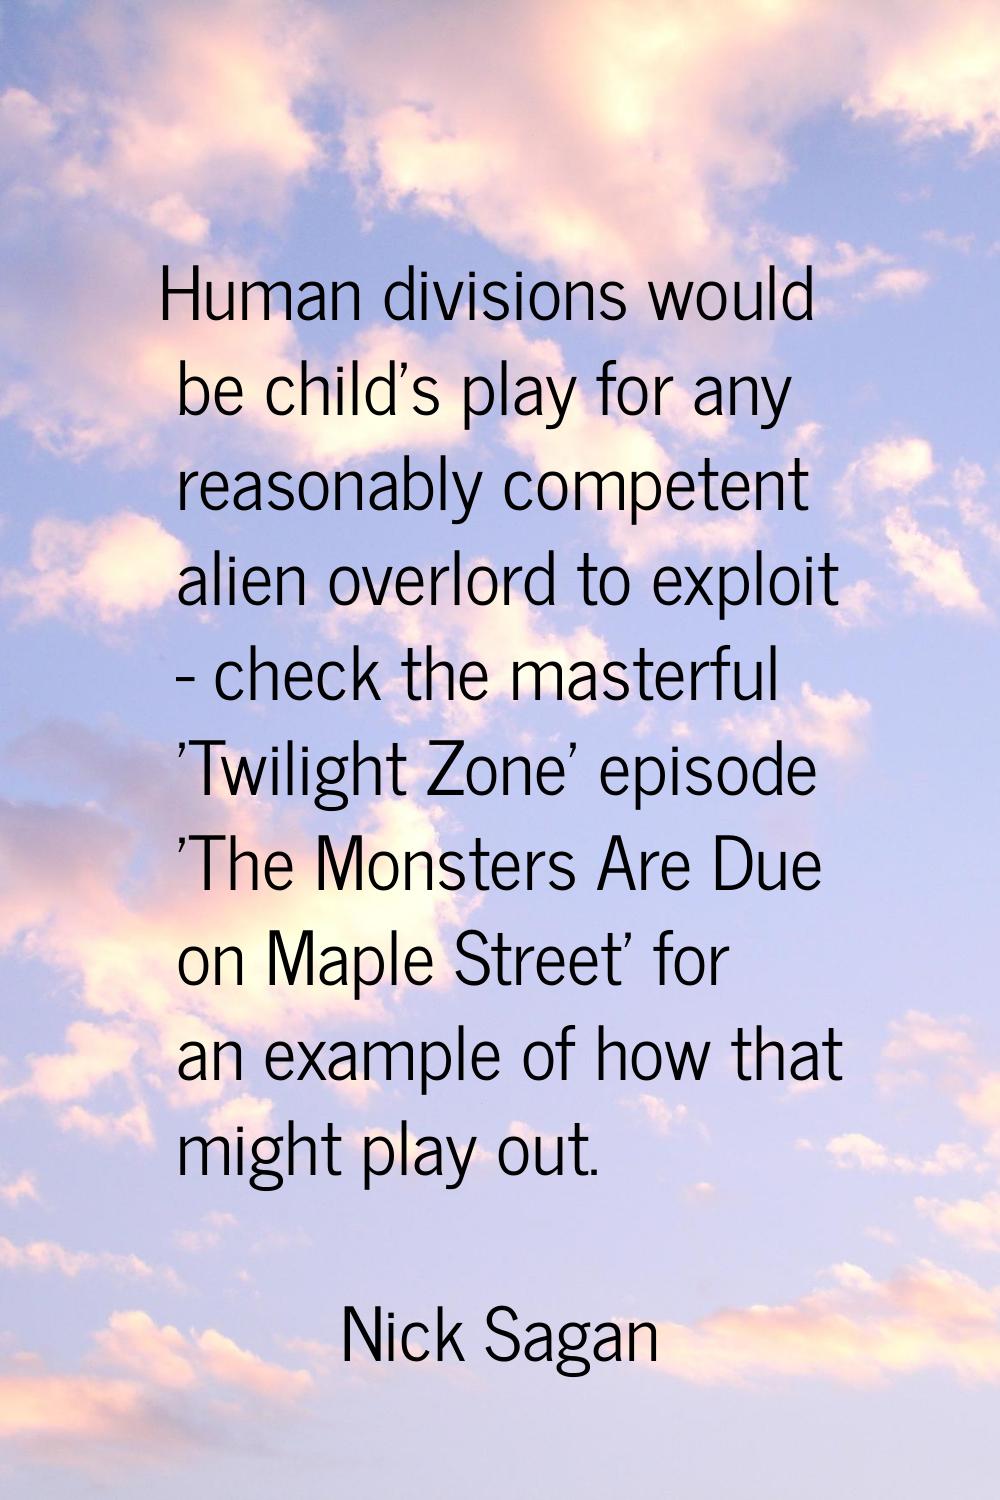 Human divisions would be child's play for any reasonably competent alien overlord to exploit - chec